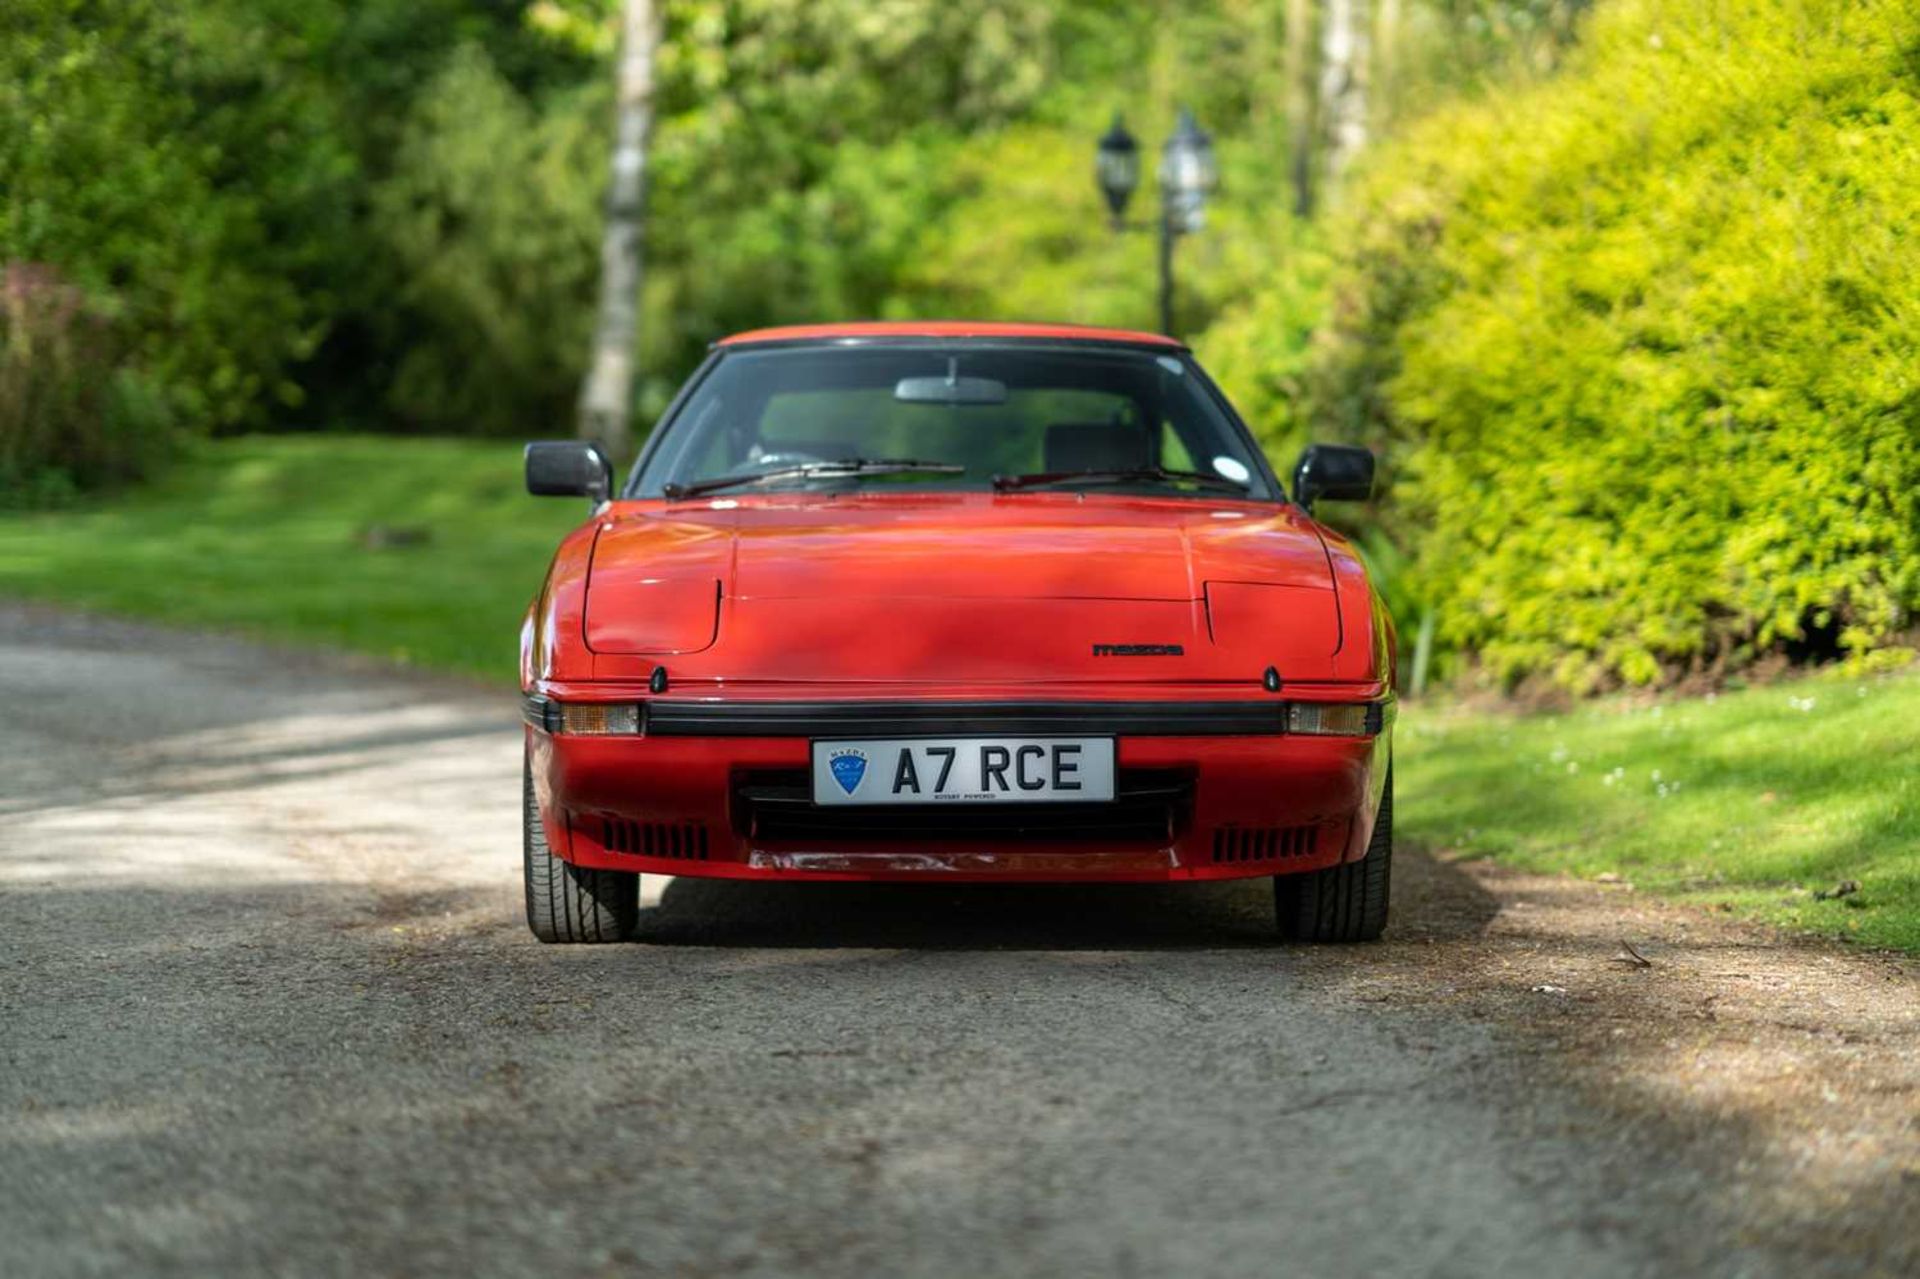 1984 Mazda RX7 Rare first generation model, consigned from long-term ownership recently featured in - Image 5 of 56